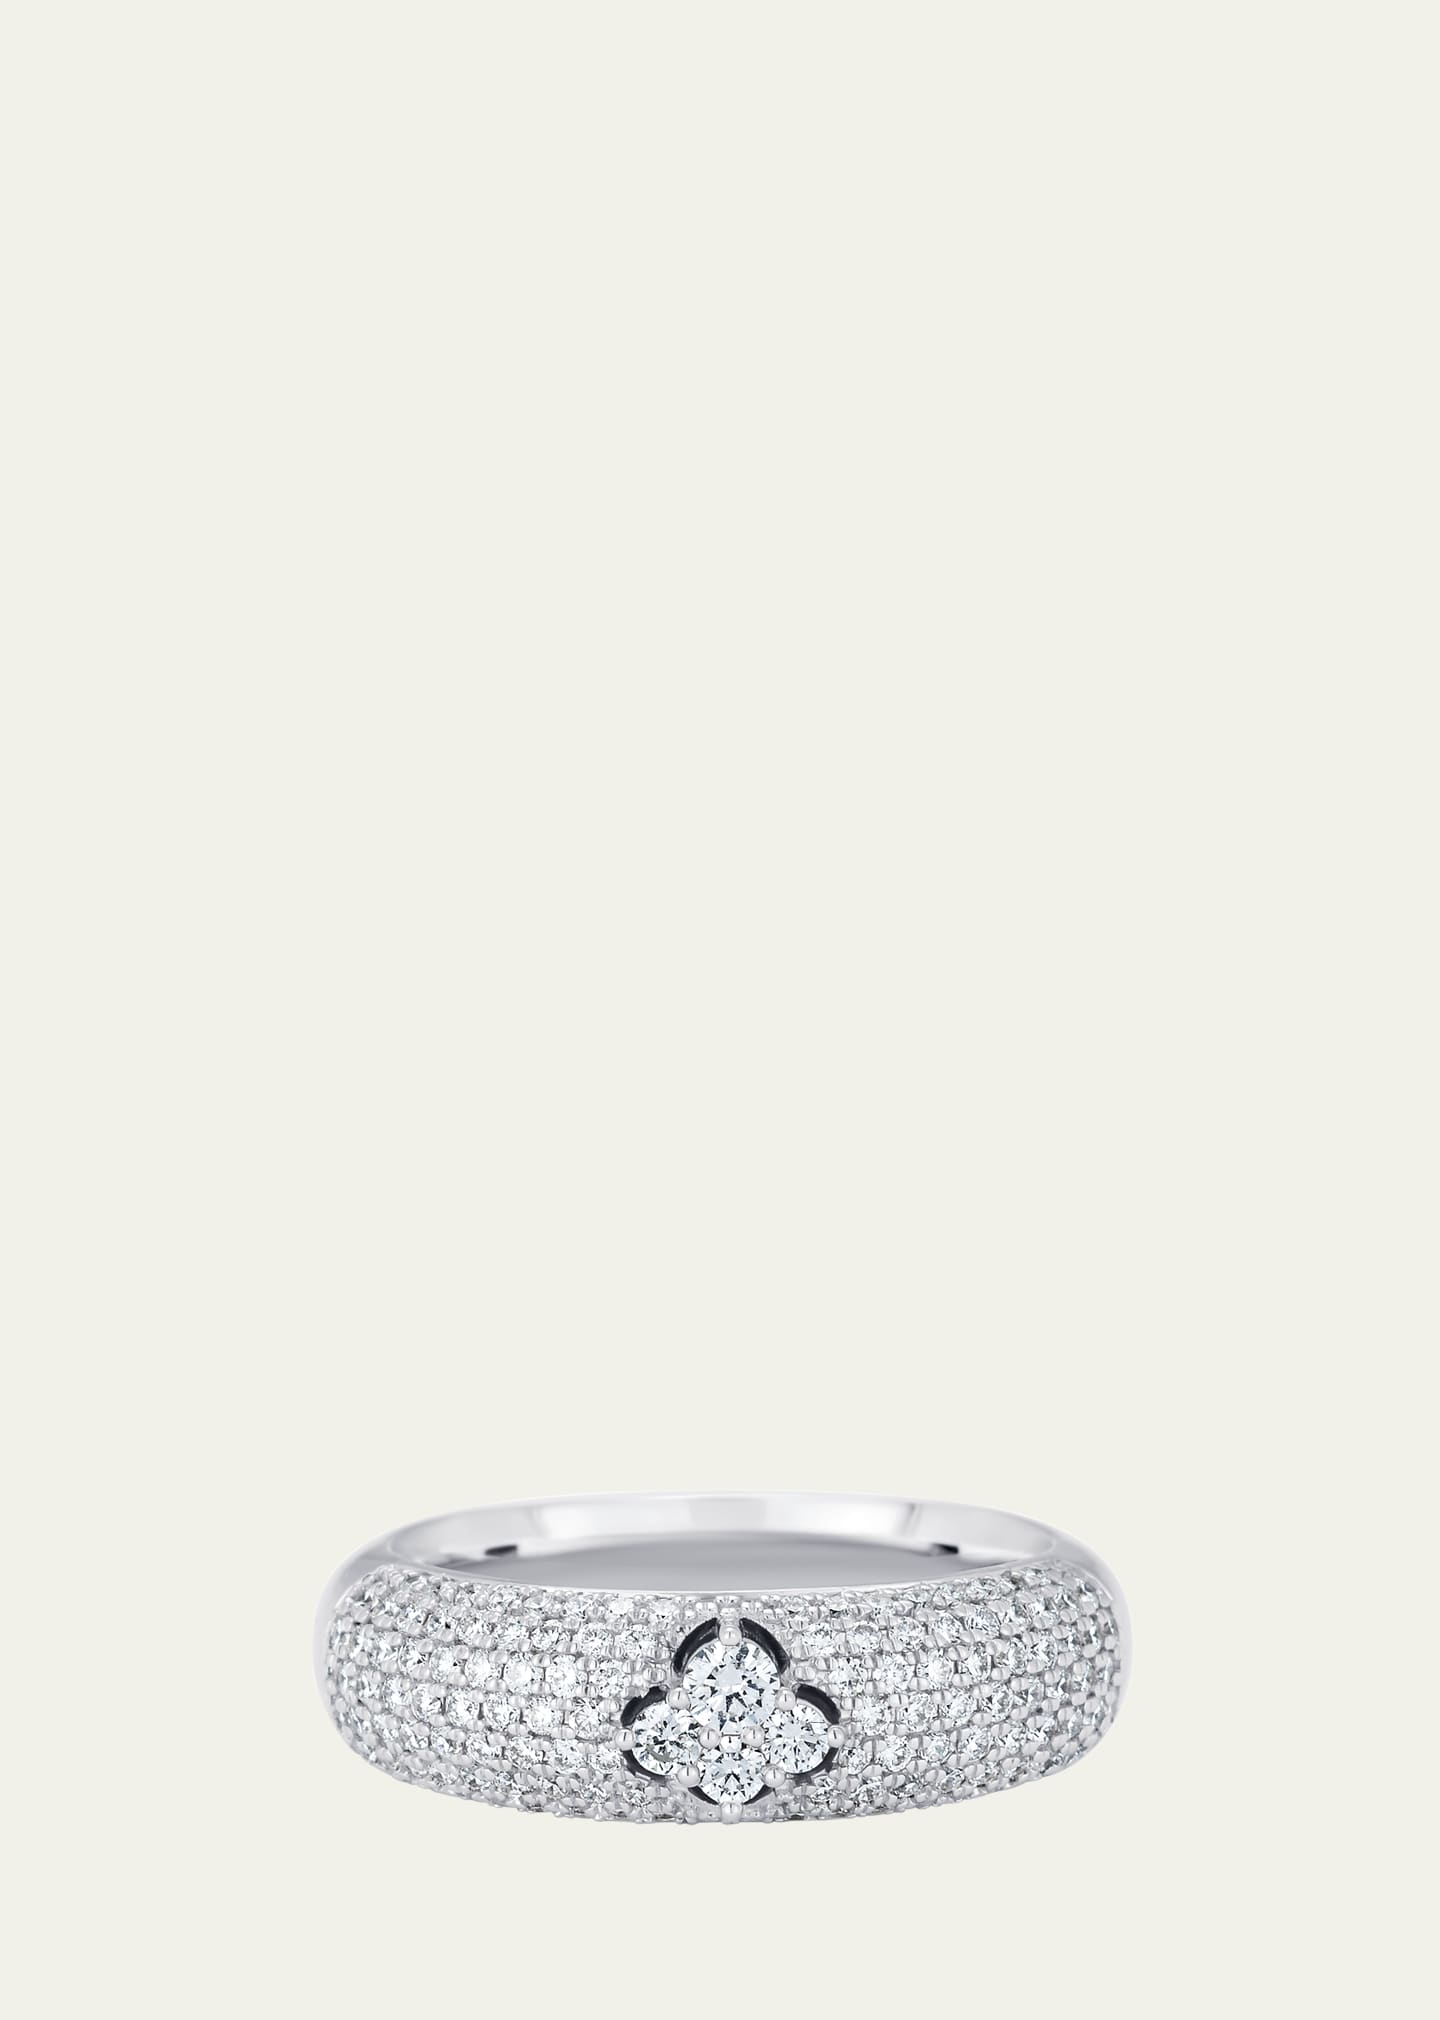 Dujour Pave Diamond and Four-Cluster White Gold Ring